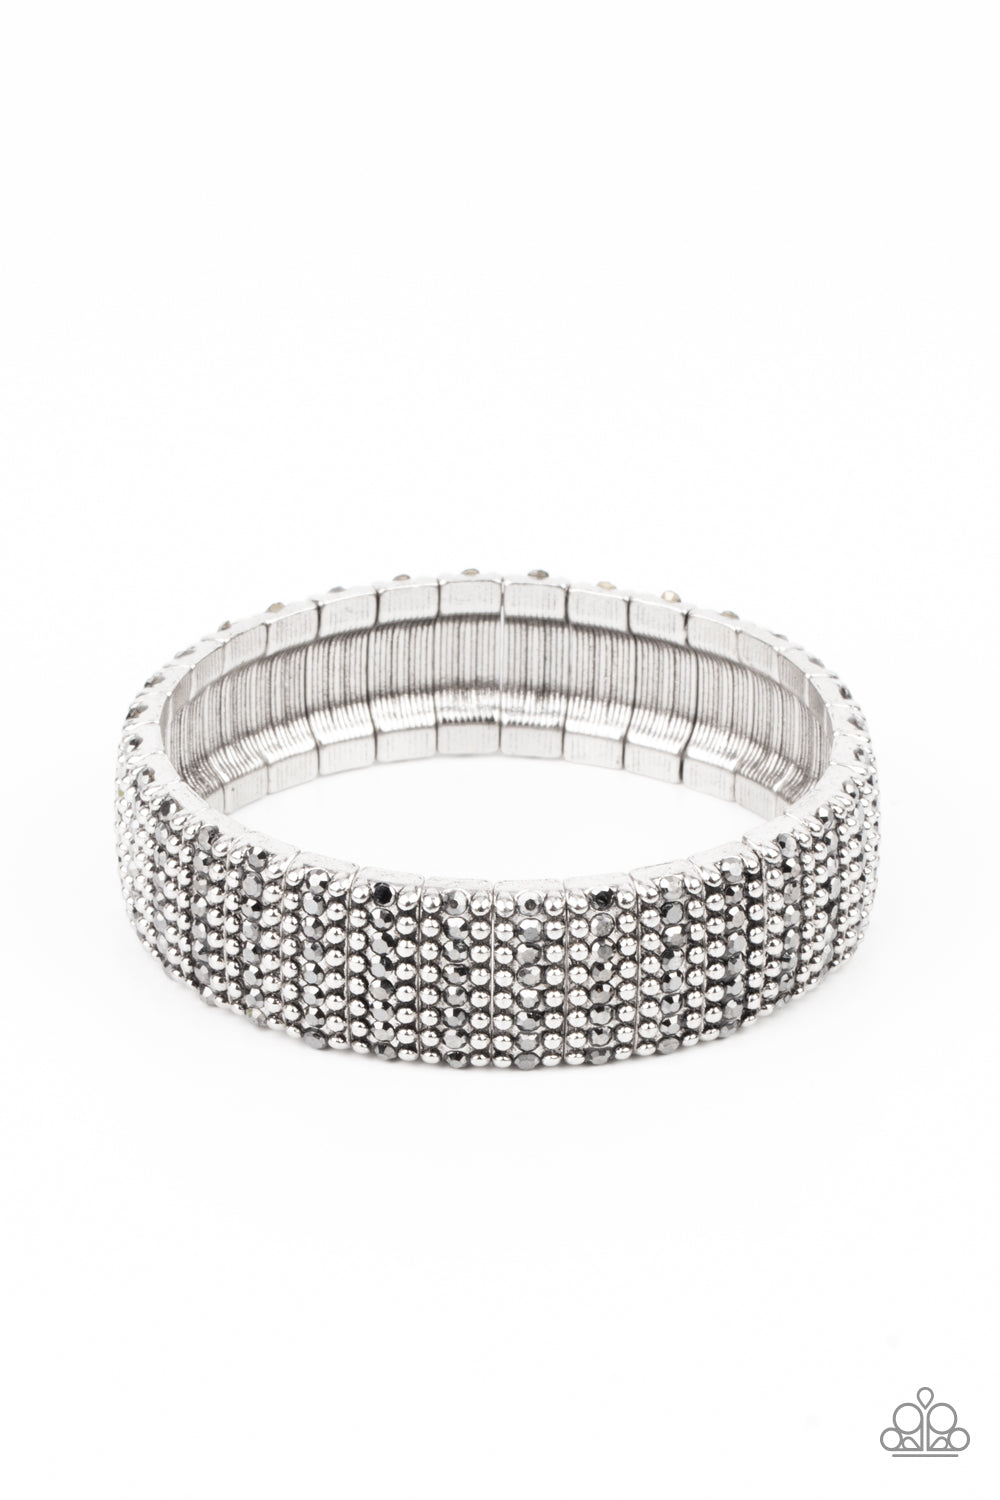 Paparazzi The GRIT Factor - Silver Bracelet - A Finishing Touch Jewelry